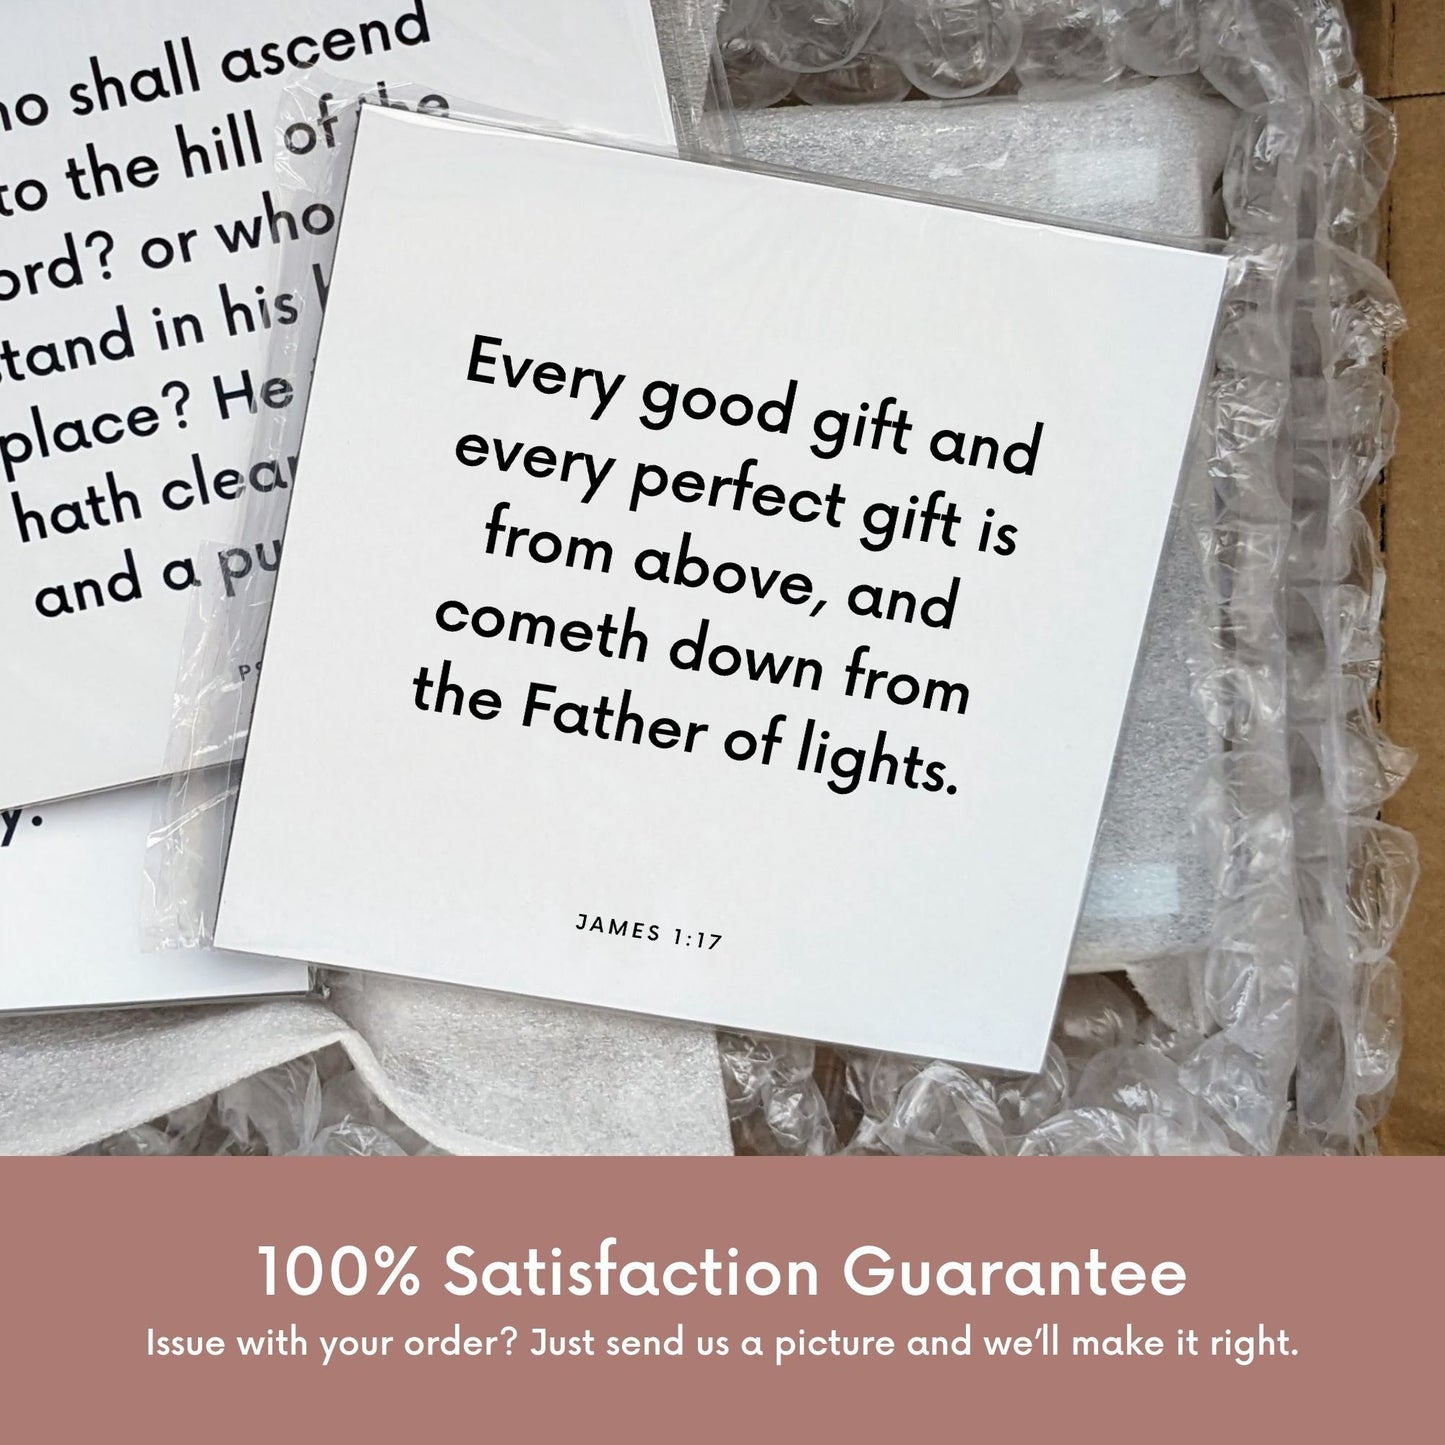 Shipping materials for scripture tile of James 1:17 - "Every good gift and every perfect gift is from above"